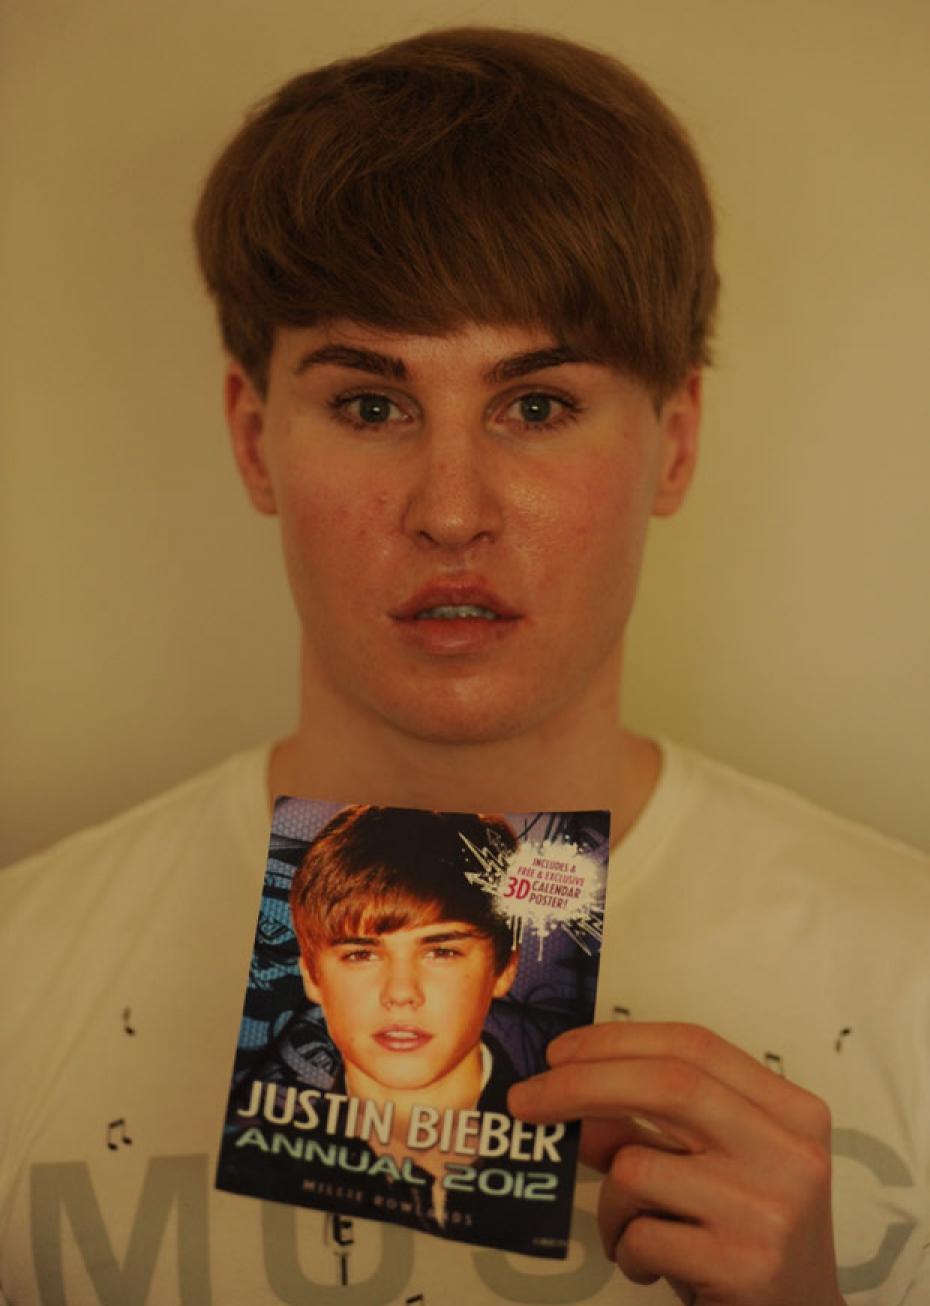 Man who did plastic surgery to look like justin bieber